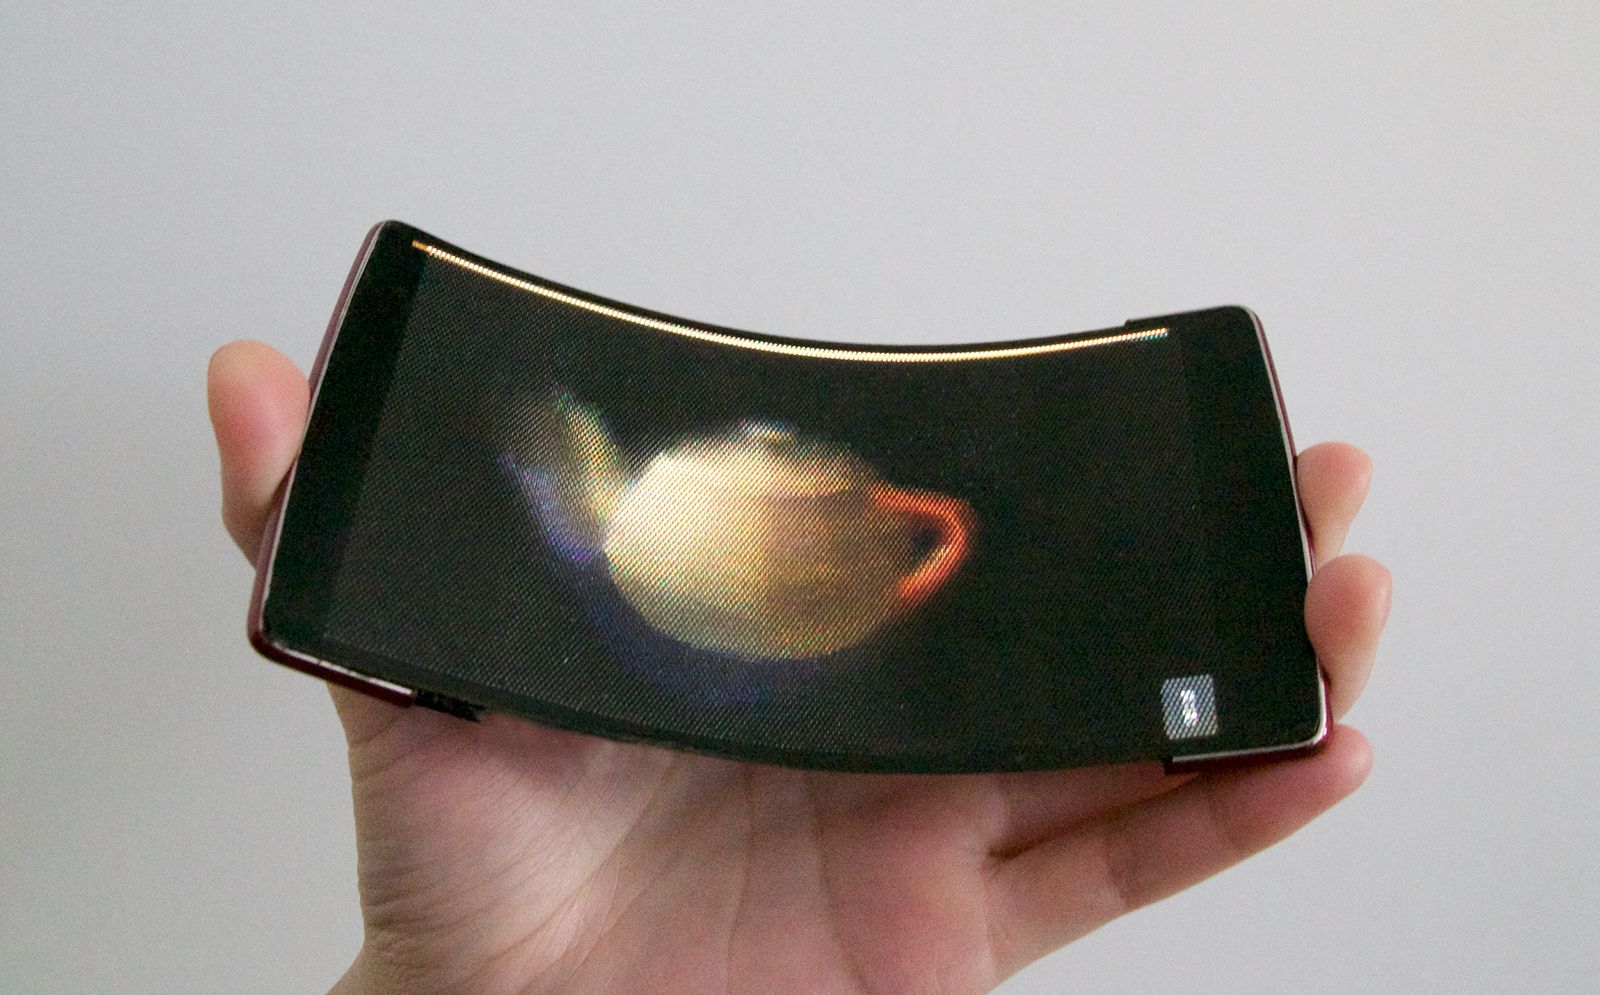 holoflex is the world’s first flexible holographic smartphone image 1